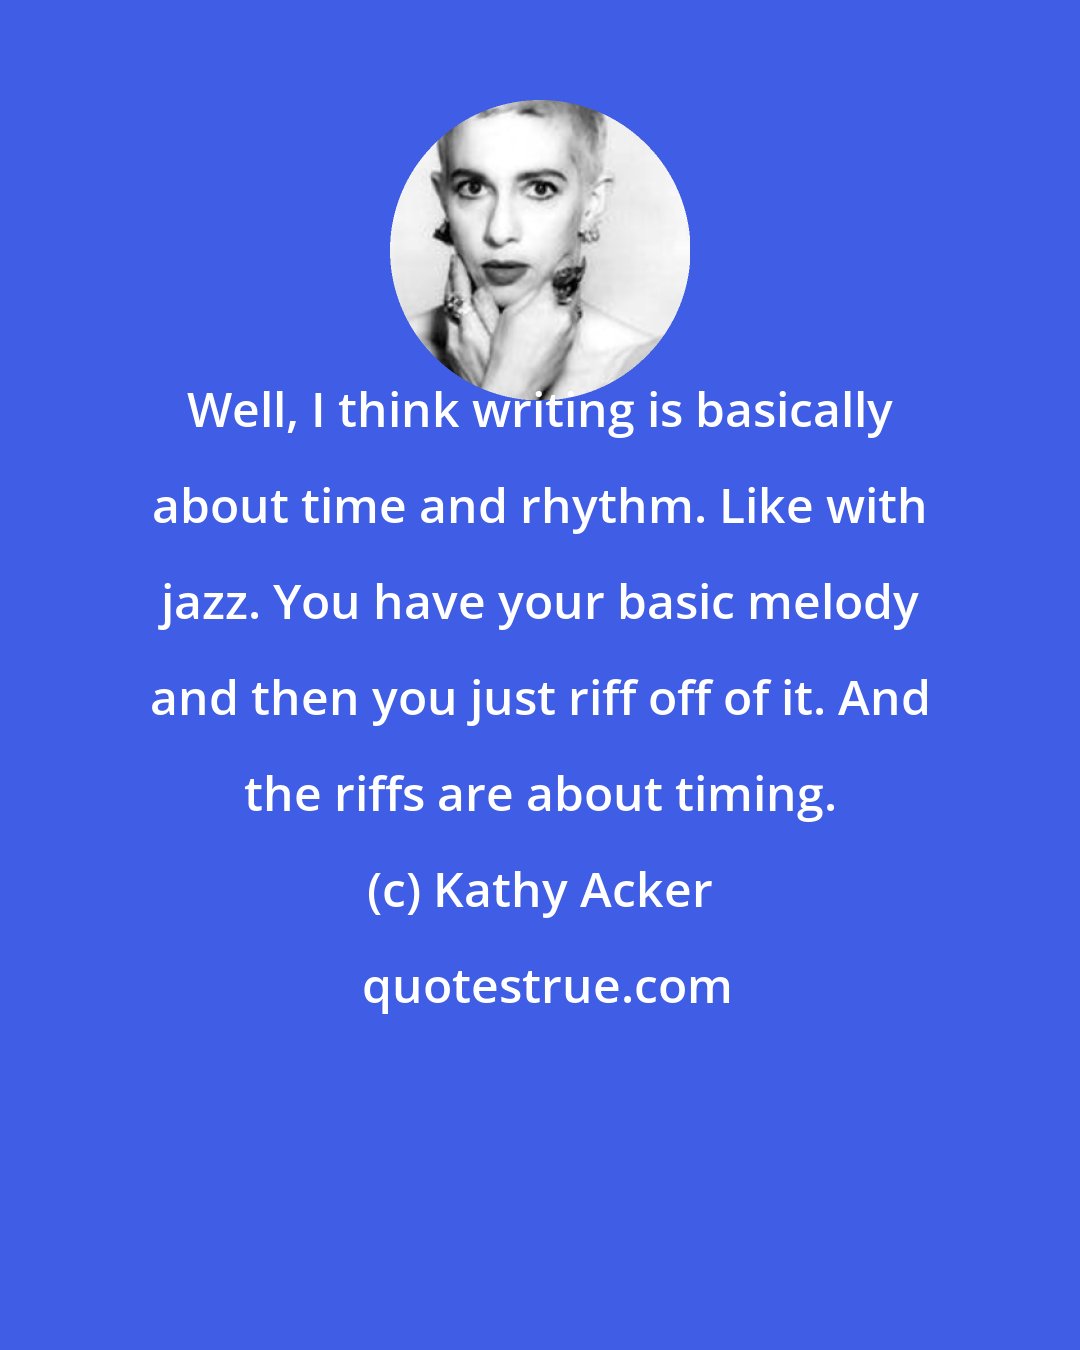 Kathy Acker: Well, I think writing is basically about time and rhythm. Like with jazz. You have your basic melody and then you just riff off of it. And the riffs are about timing.